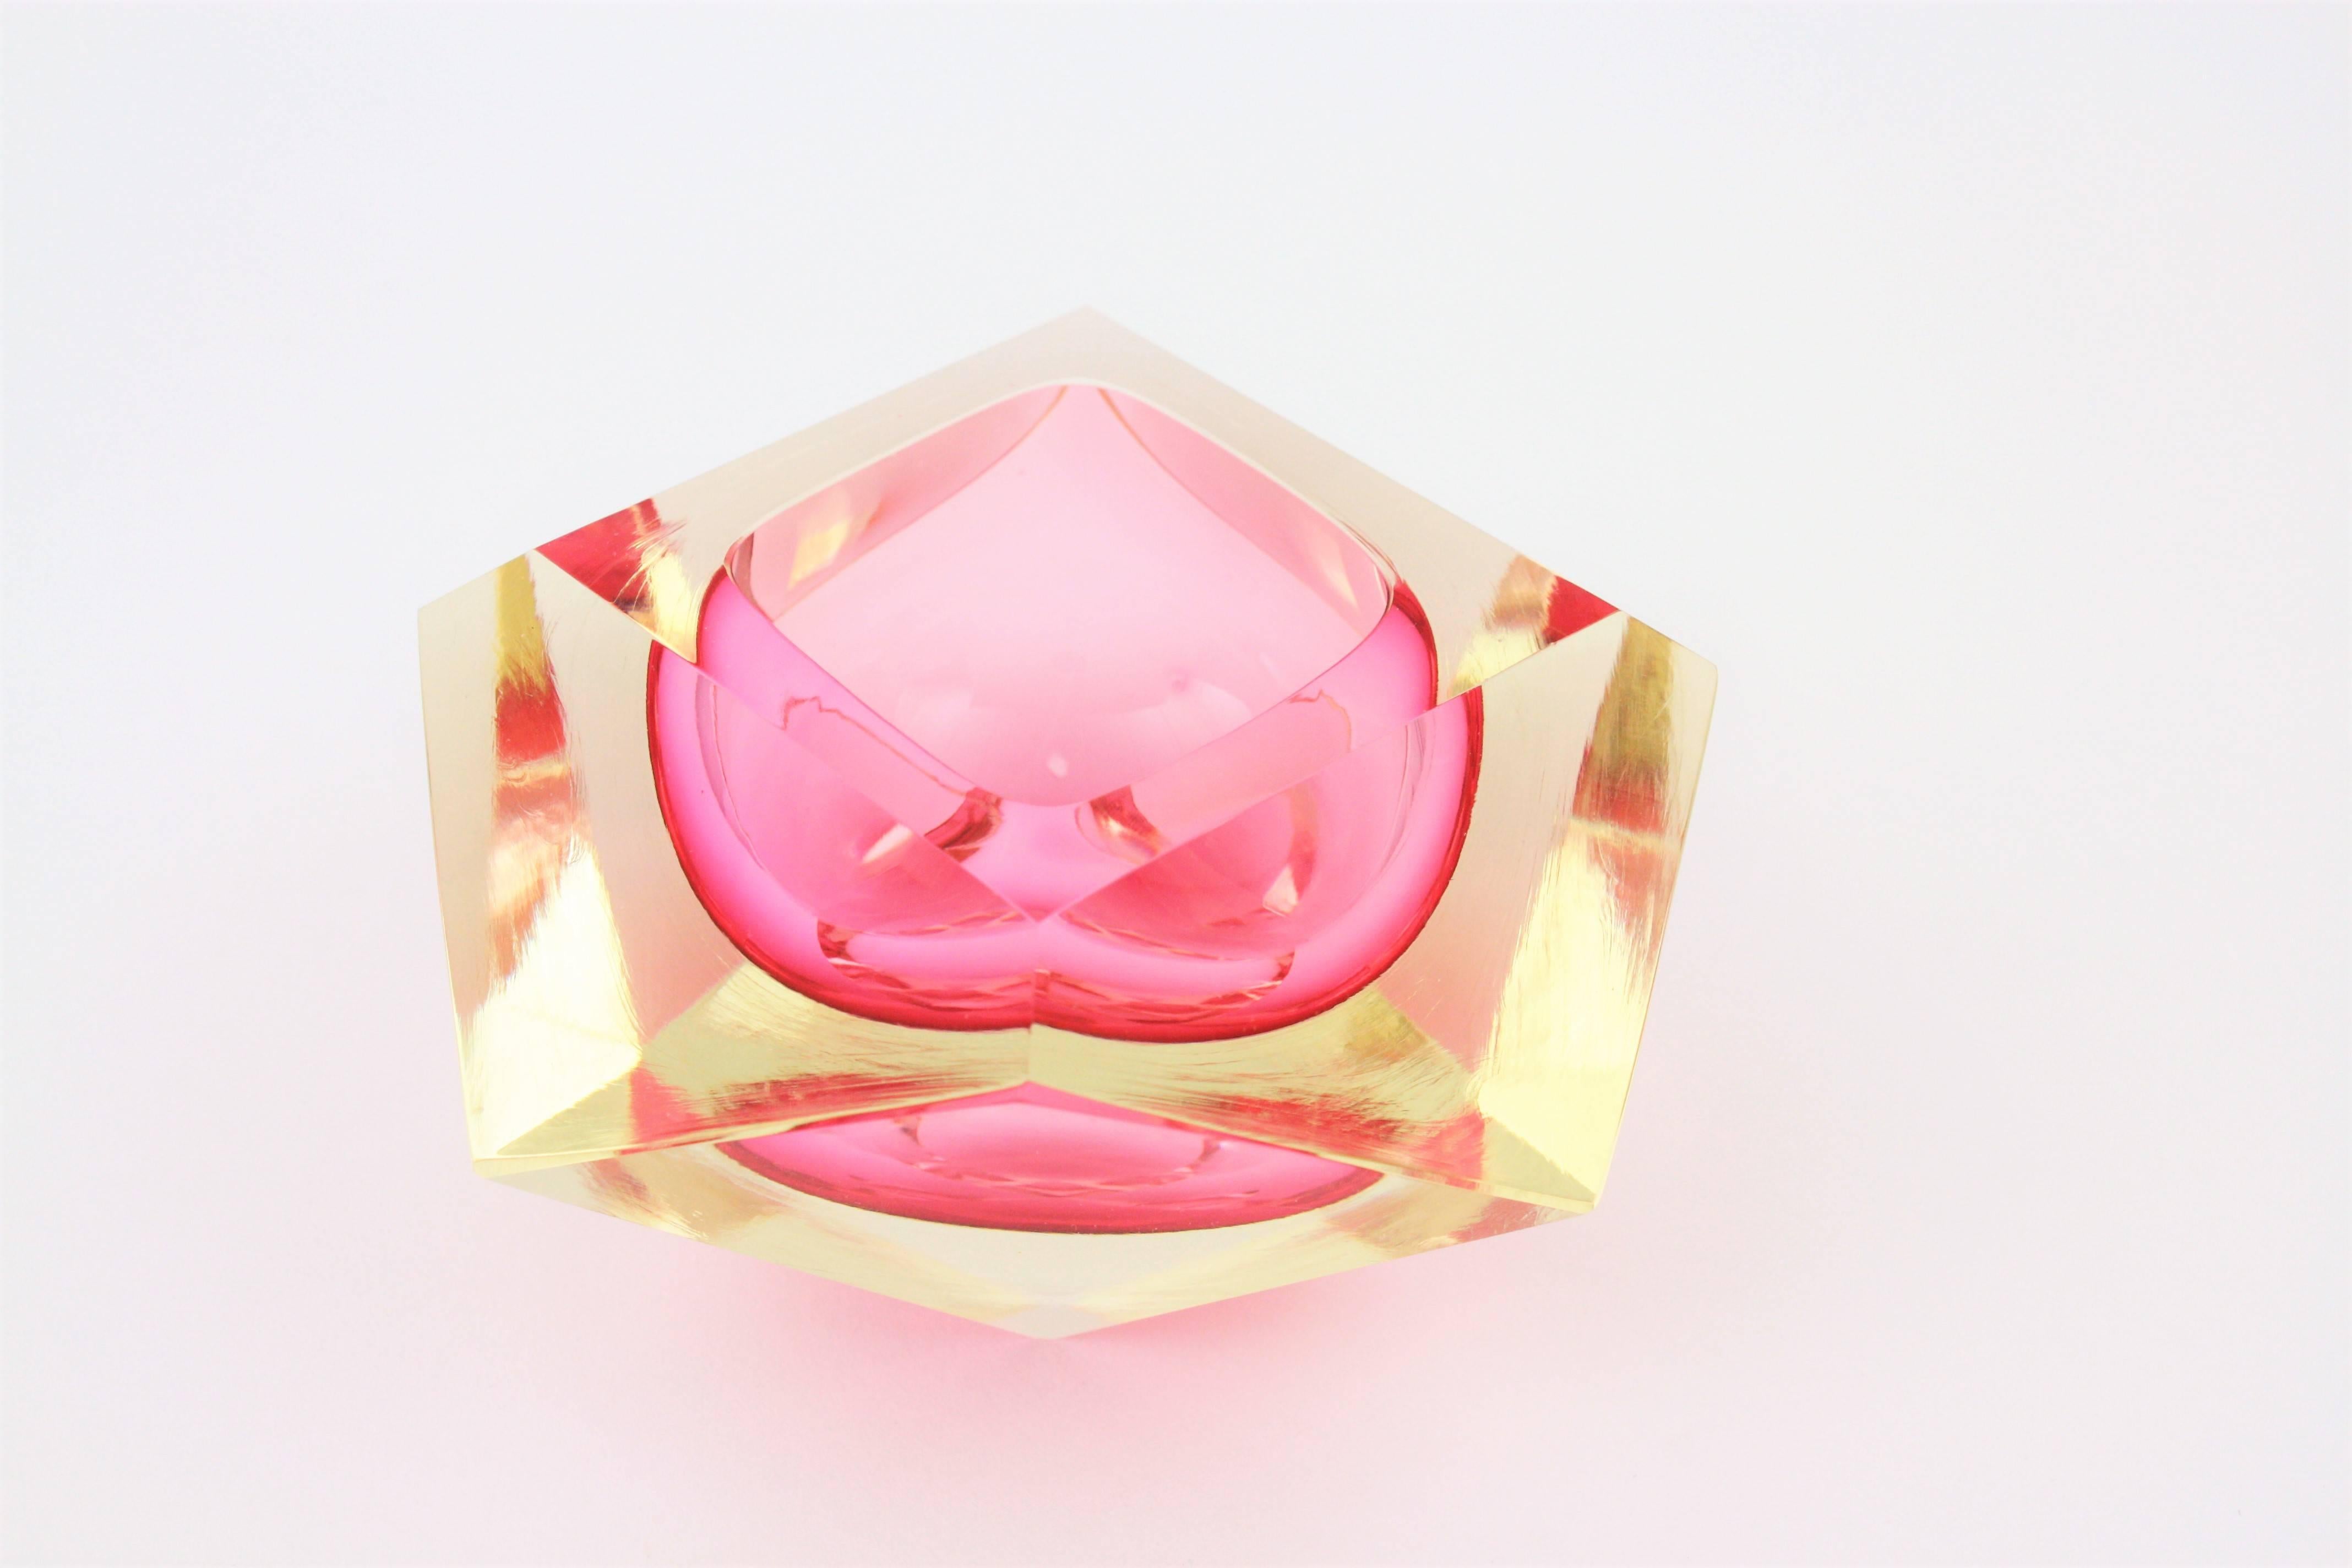 Flavio Poli Sommerso faceted diamond shaped Murano glass ashtray in neon pink and light cranberry glass cased into yellow glass. 
Italy, 1950s.

The piece is in excellent condition.
Gorgeous placed with other Murano glass pieces as a